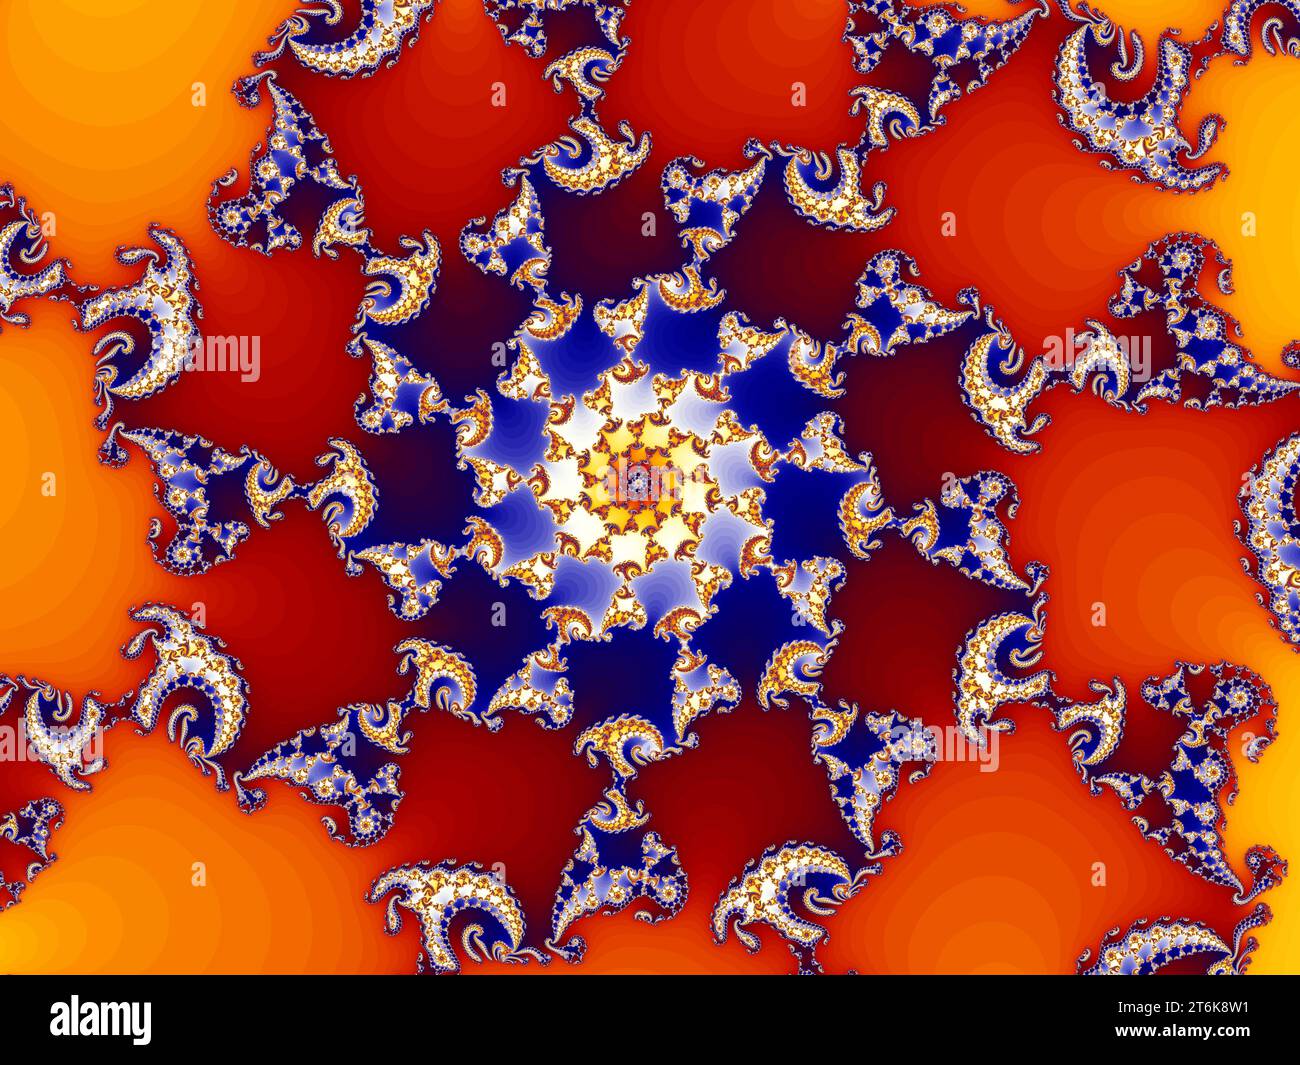 Spirals, Shapes and Colors Math Fractal. Stock Photo